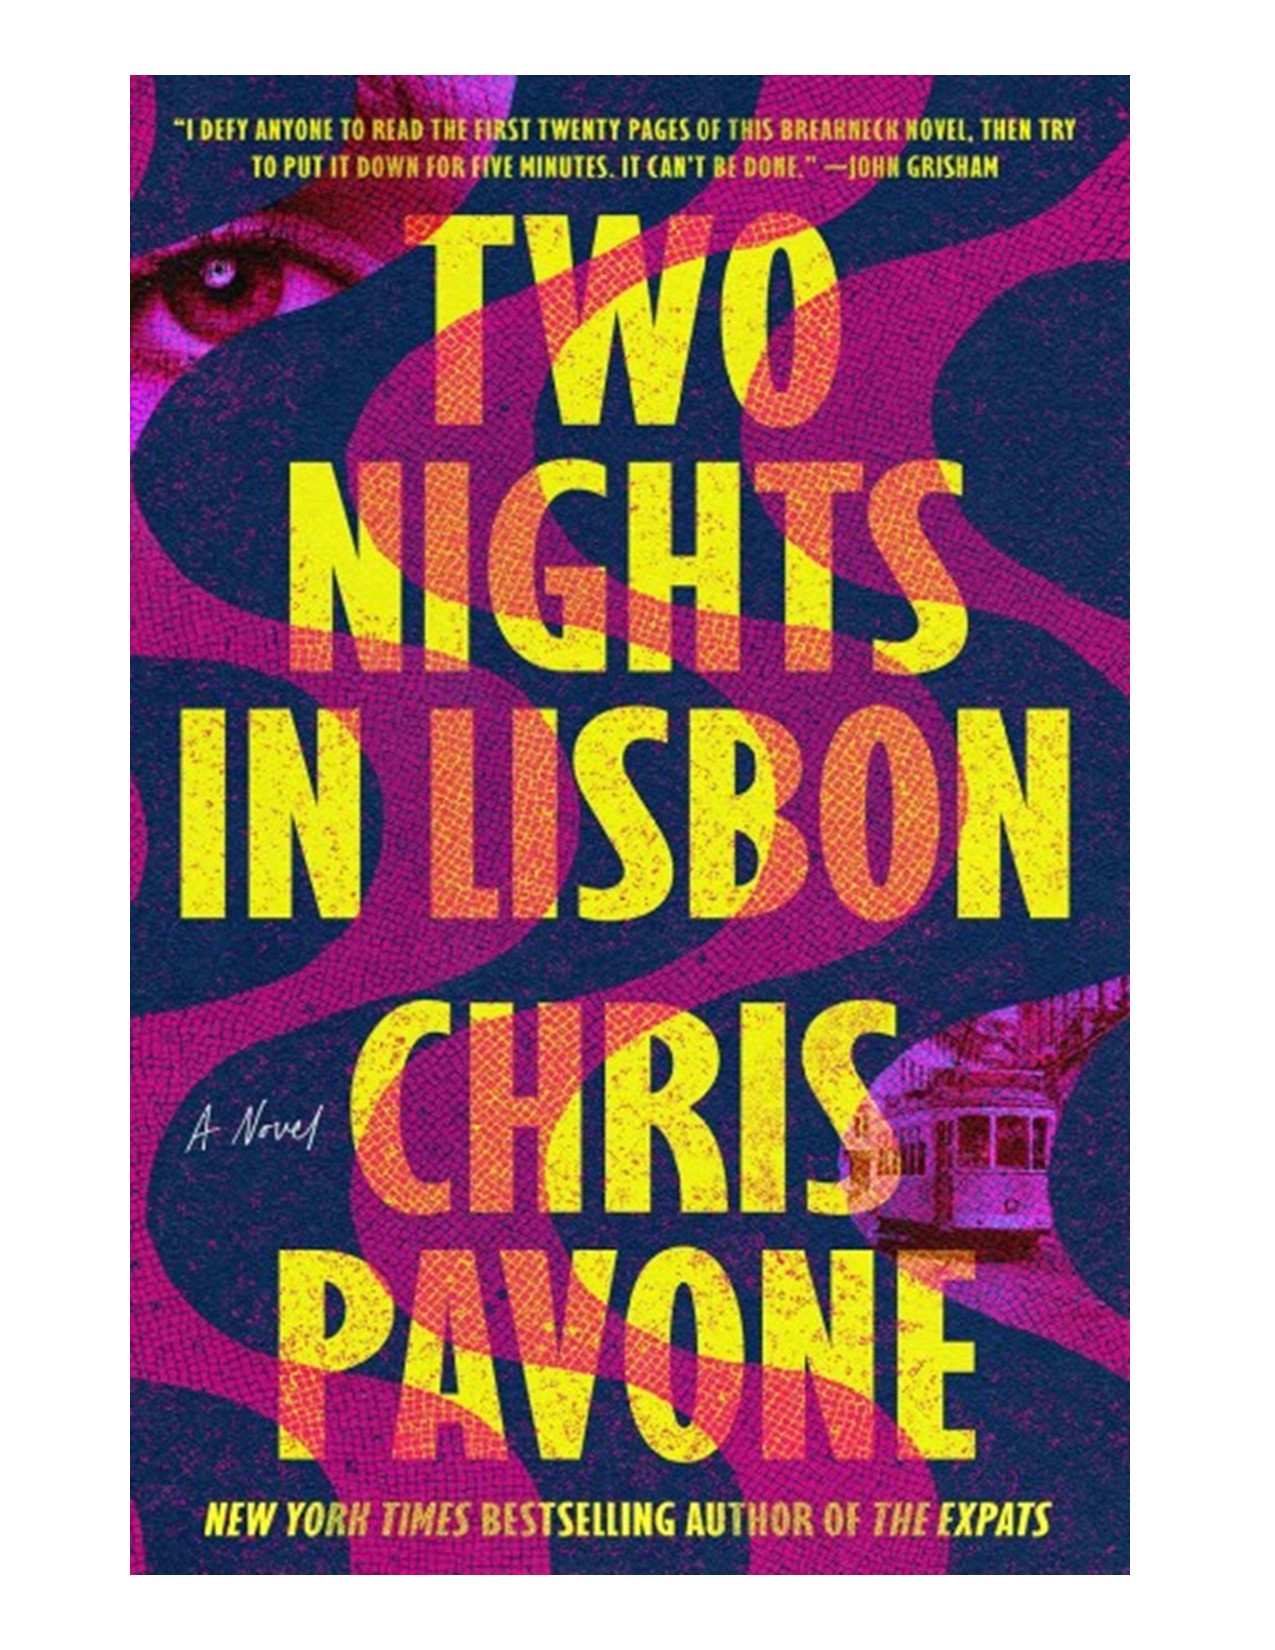 Two Nights in Lisbon book cover